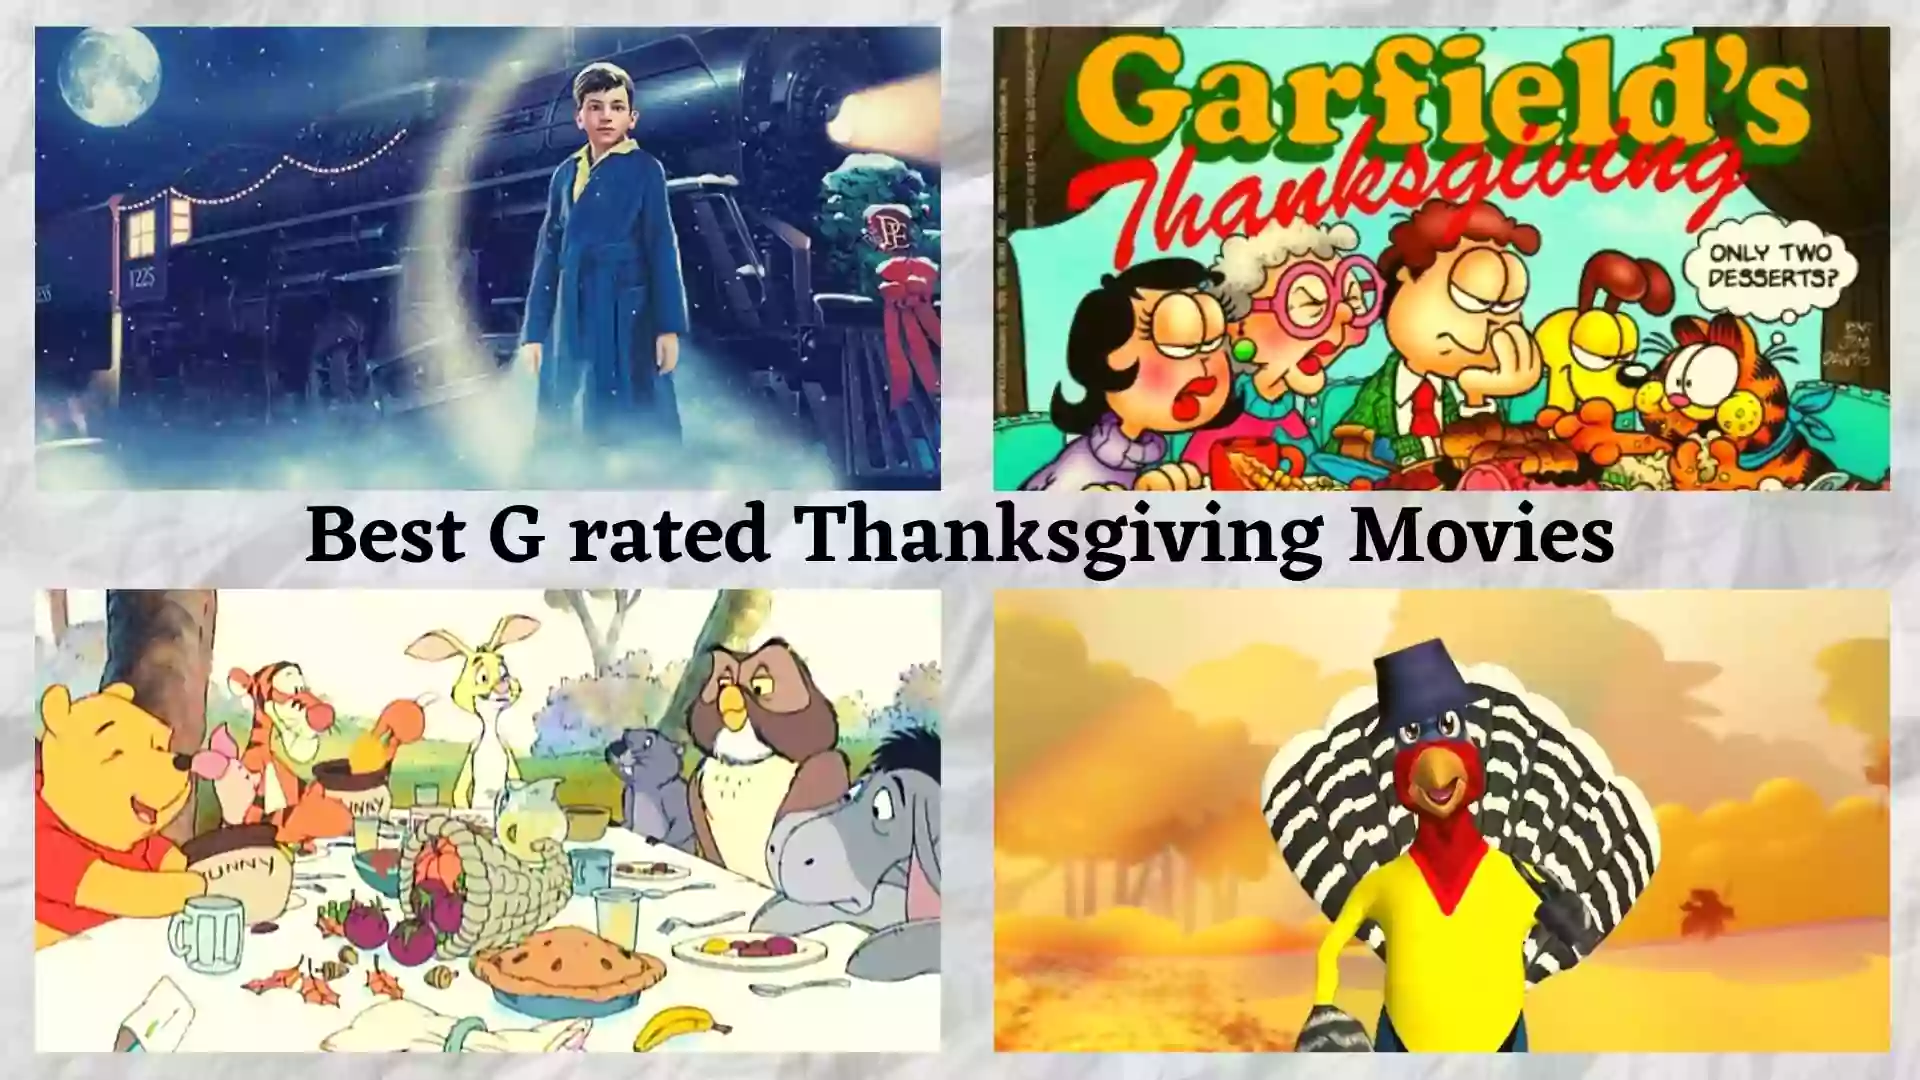 Best G rated Thanksgiving Movies